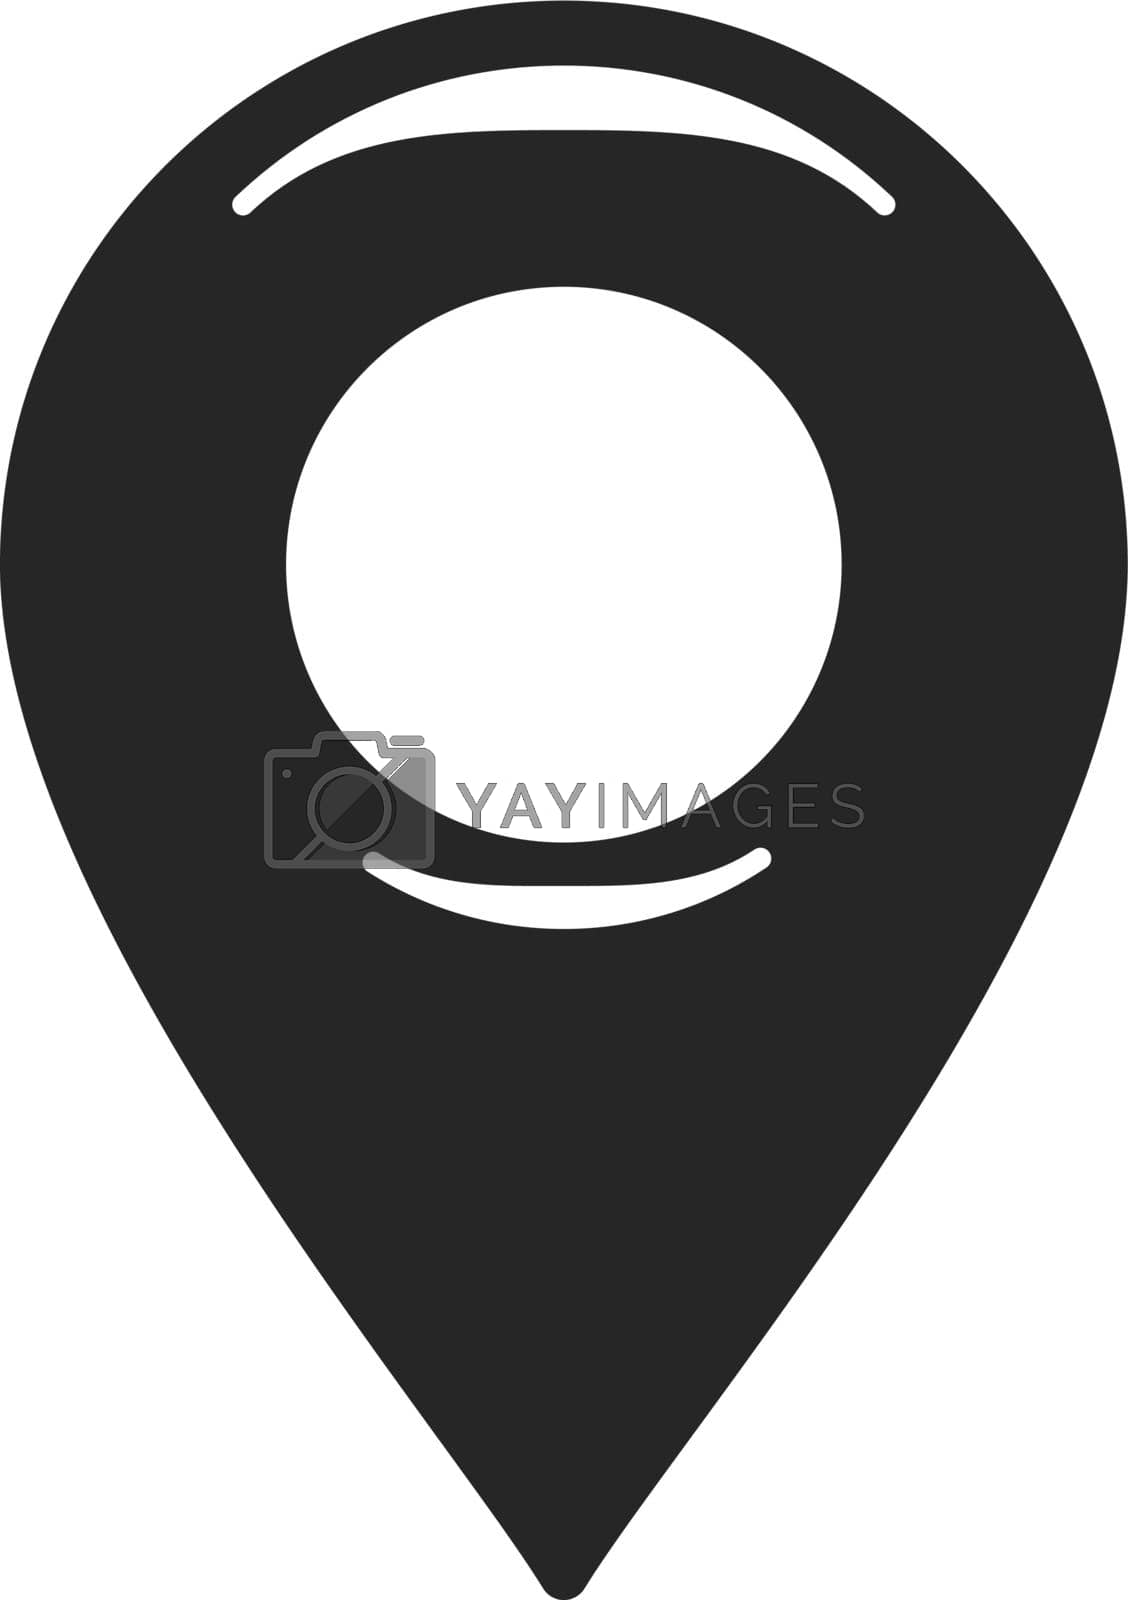 Royalty free image of Geo pin icon. Black map tag logo by ONYXprj